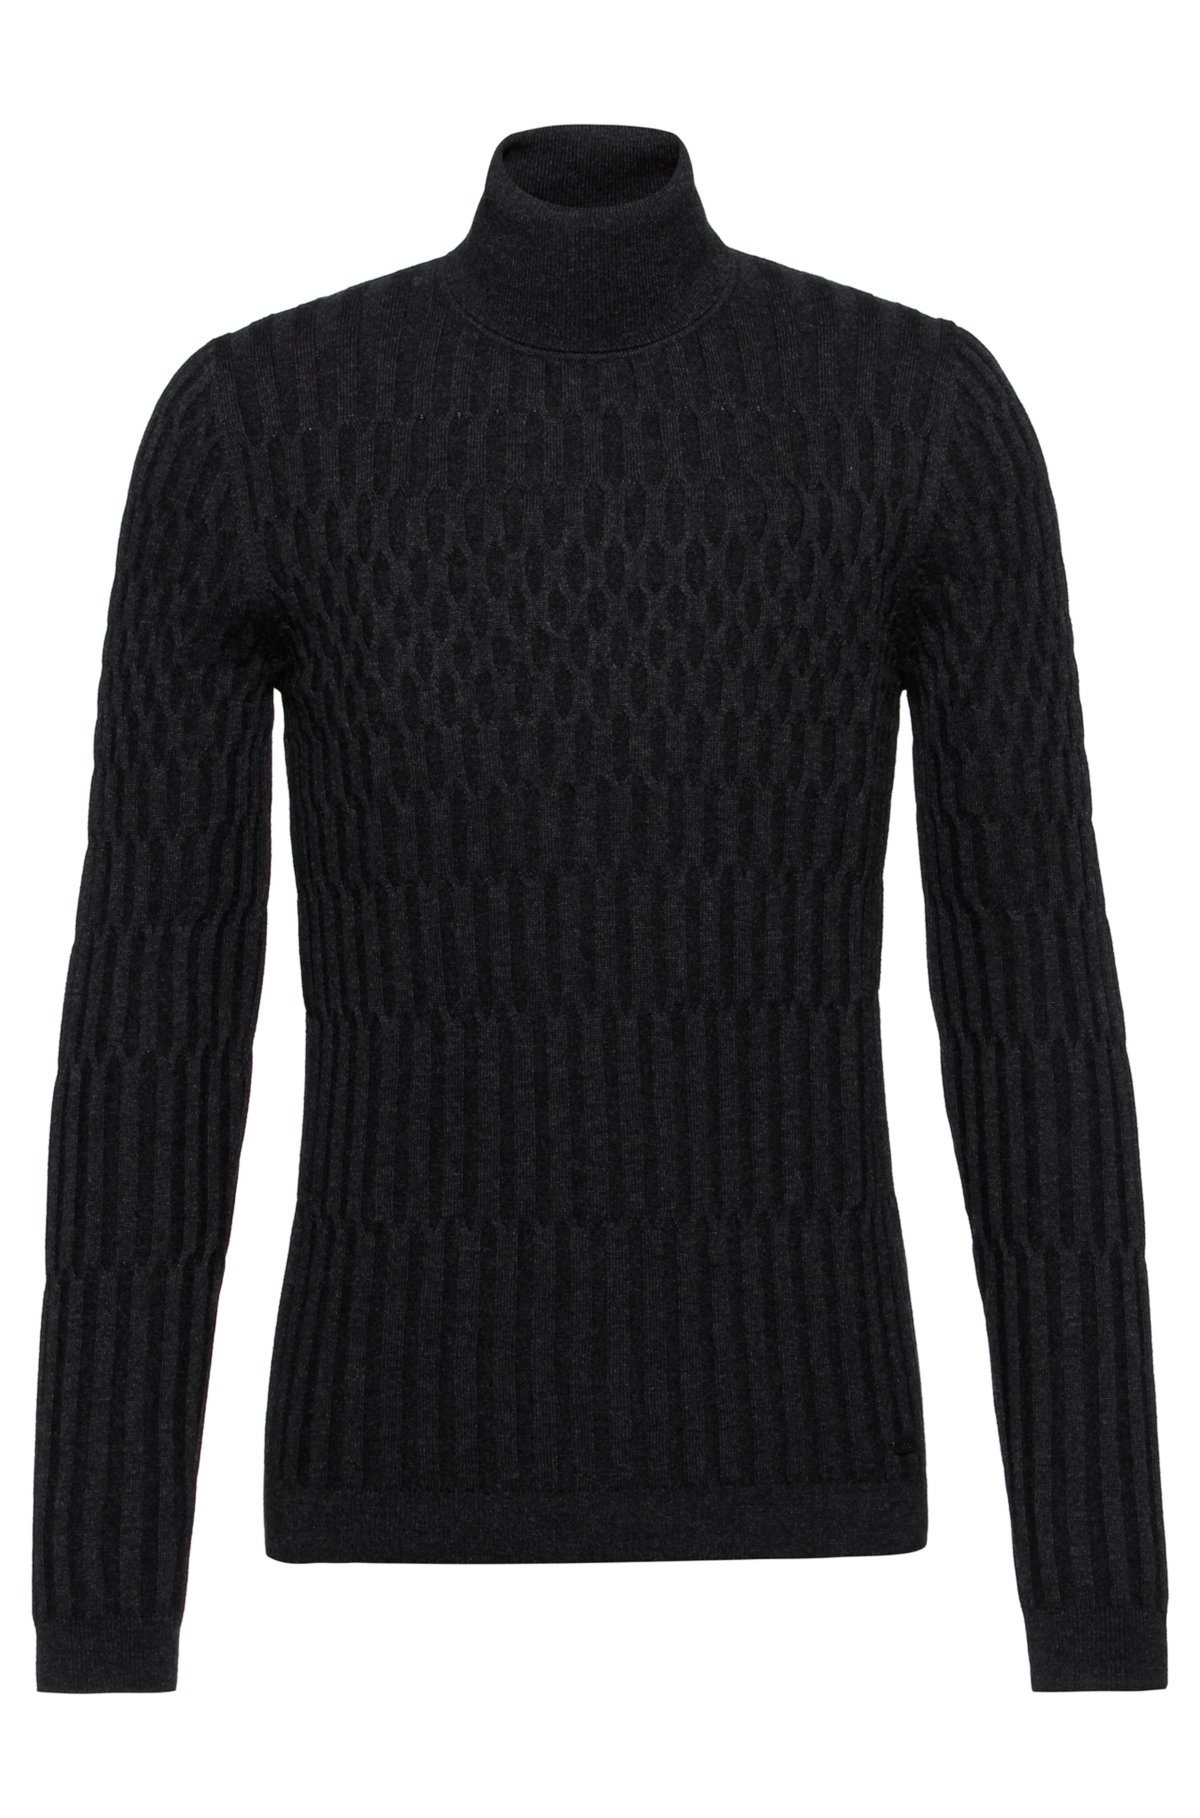 Black And White Contrast Knitted Turtleneck Sweater